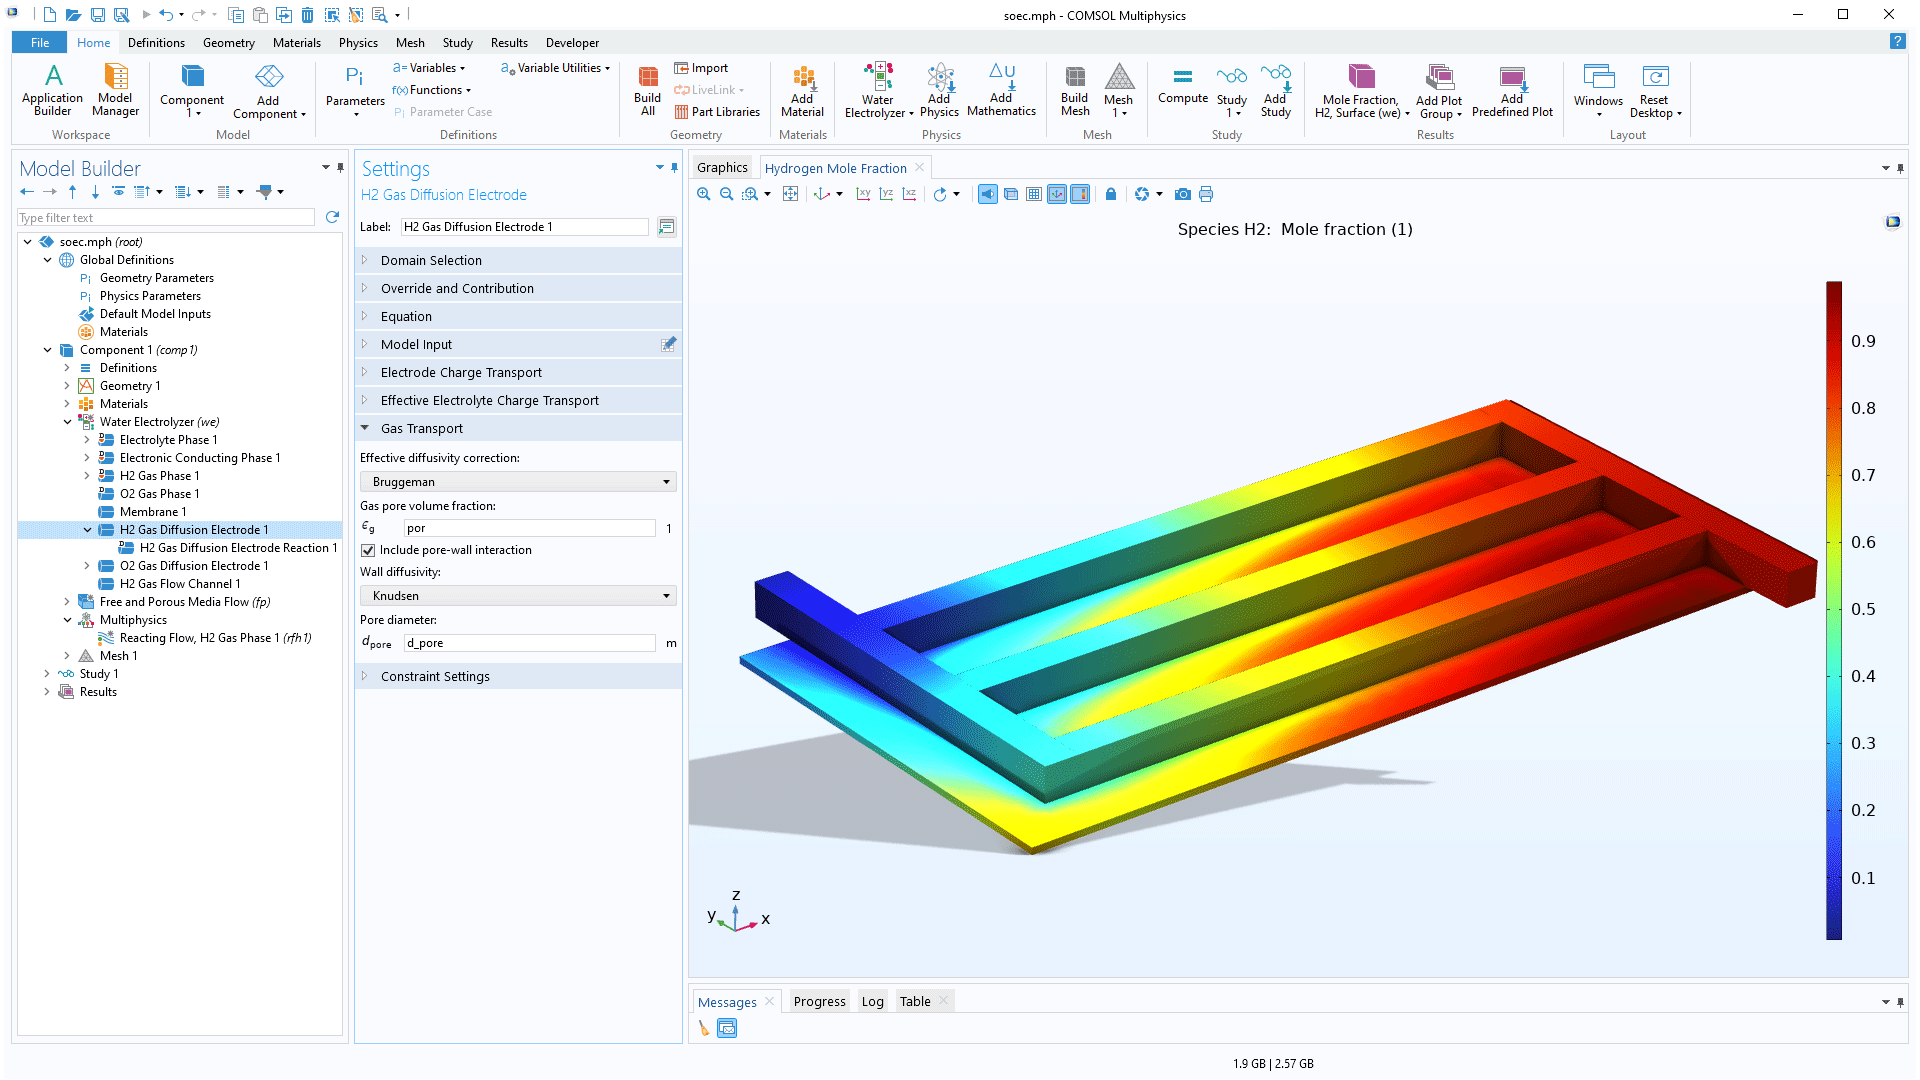 The COMSOL Multiphysics UI showing the Model Builder with the H2 Gas Diffusion Electrode node highlighted, the corresponding Settings window, and an electrolyzer model in the Graphics window.